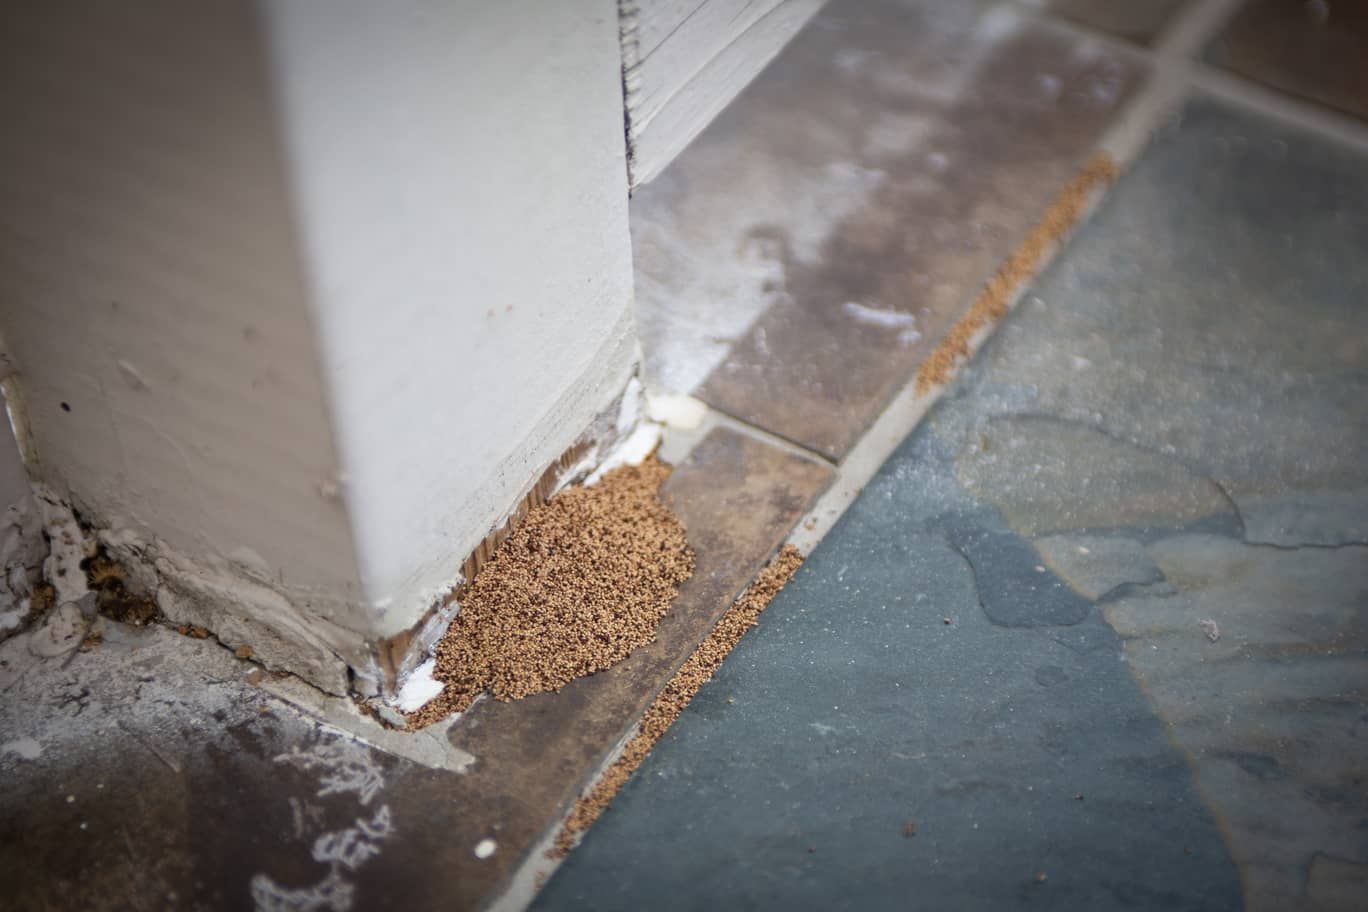 A close up of a termite nest on a tiled floor next to a wall.